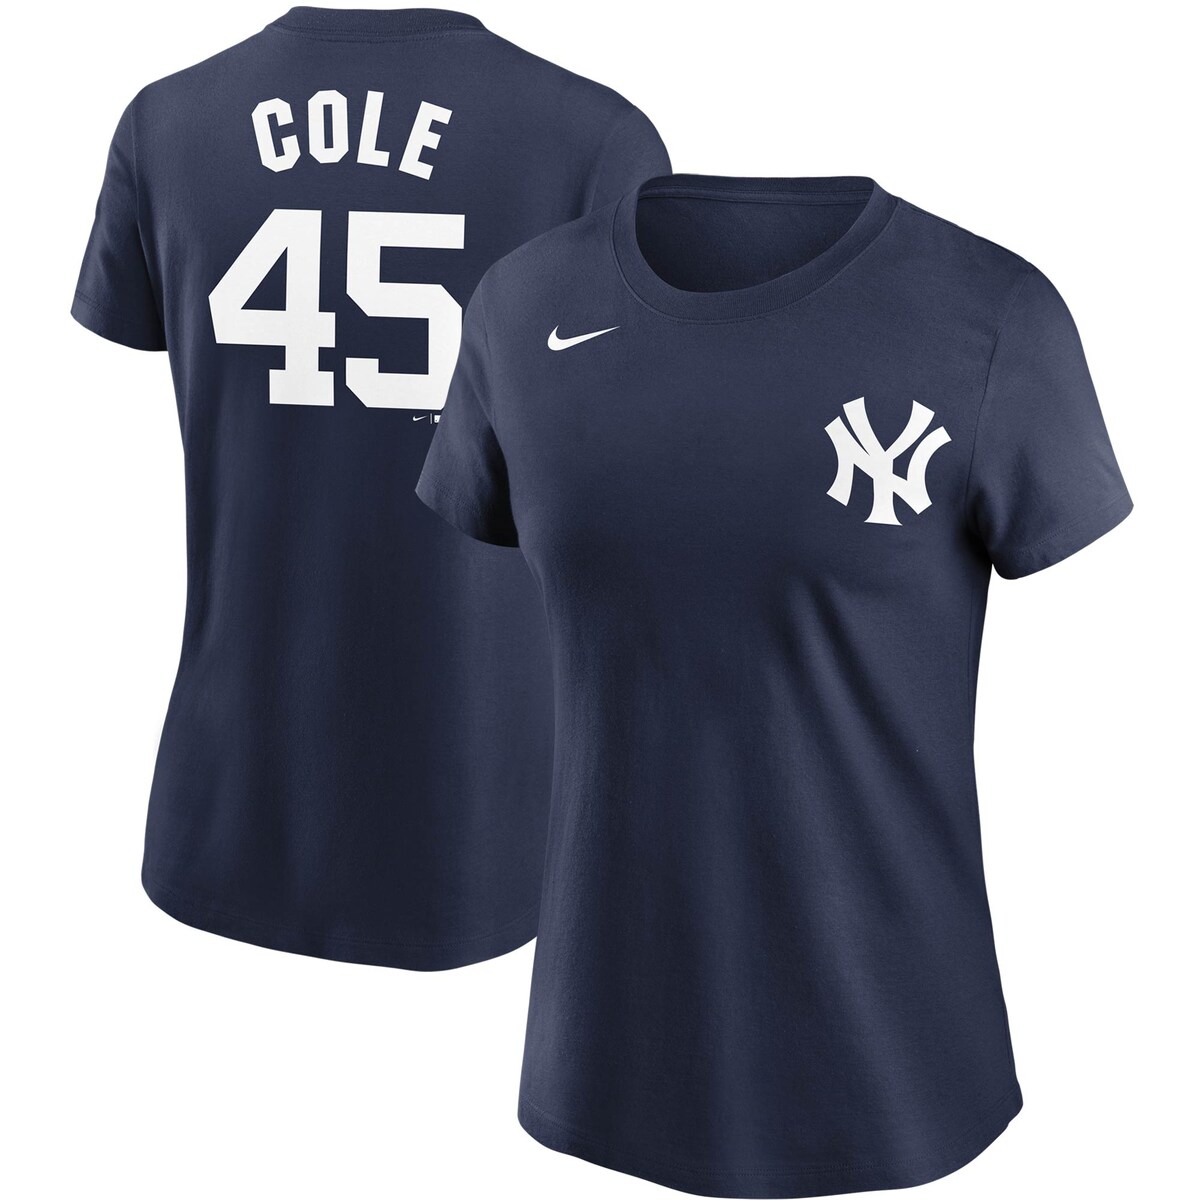 Before Gerrit Cole and the New York Yankees step on the field for the next game, gear up in this Name and Number T-shirt from Nike. Its lightweight cotton fabric is breathable and comfortable, perfect for the midsummer heat of baseball season. Both the front and back are decked out in detailed graphics that will highlight your admiration of one of the game's best.Rib-knit collarMachine wash, tumble dry lowImportedOfficially licensedScreen print graphicsBrand: NikeShort sleeveMaterial: 100% CottonCrew neck